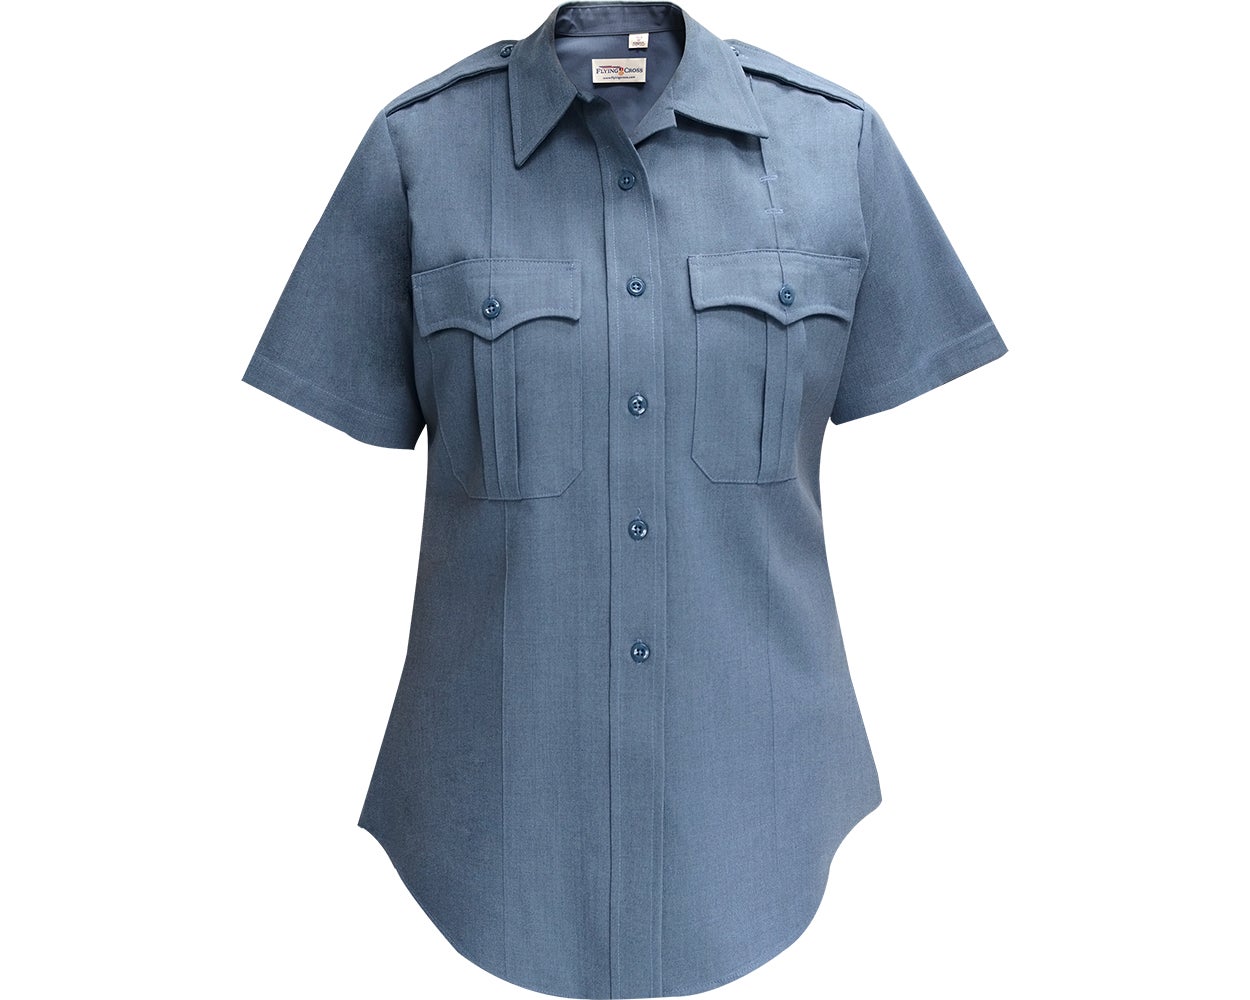 Flying Cross Deluxe Tropical Women's Short Sleeve Shirt with Traditional Collar 154R66 - French Blue, 42